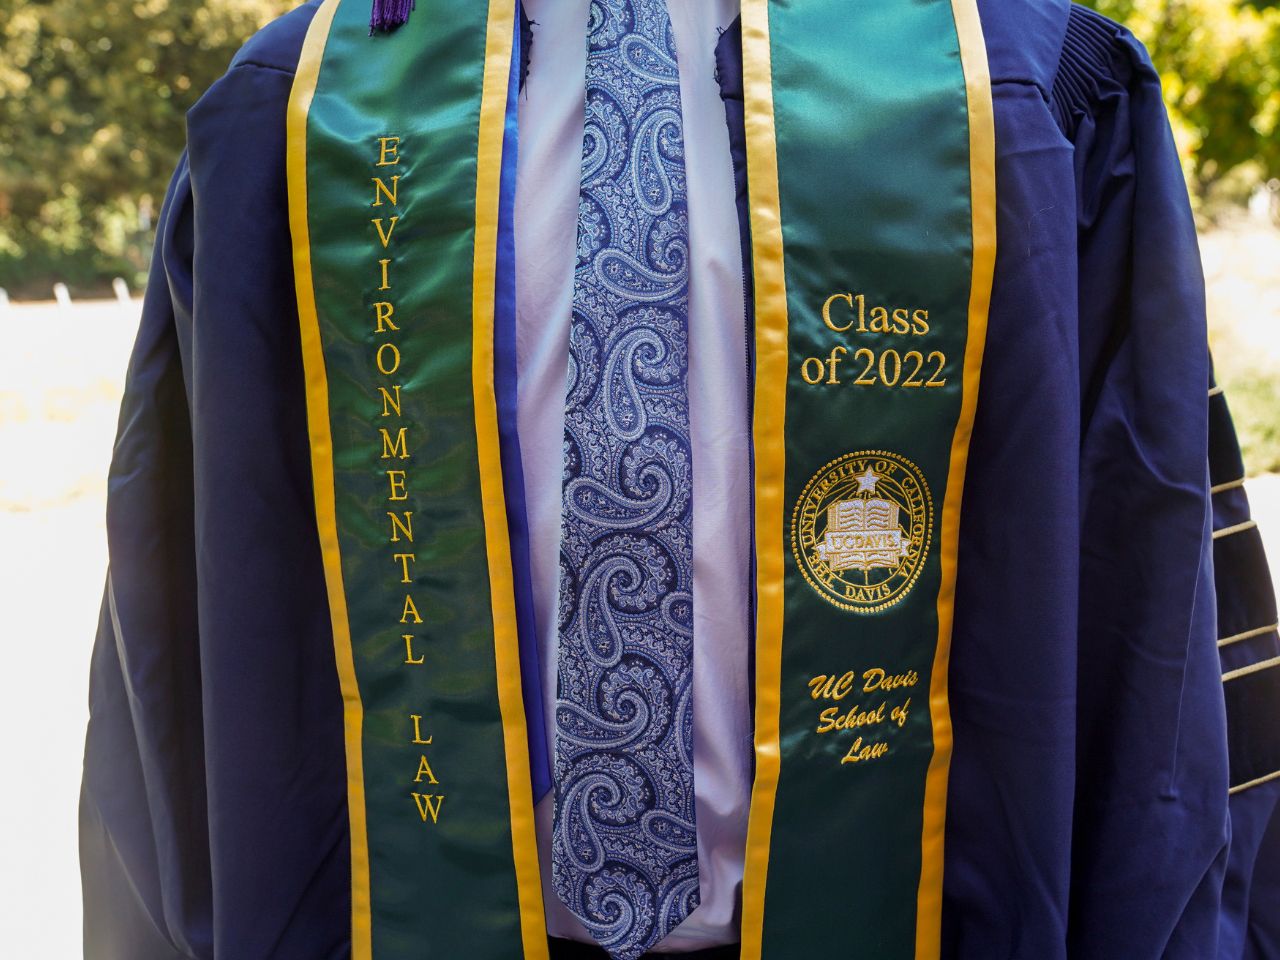 A student wearing a commencement robe and tie displays a green stole embroidered with the words "Environmental Law Class of 2022 ˽̳ Davis School of Law."